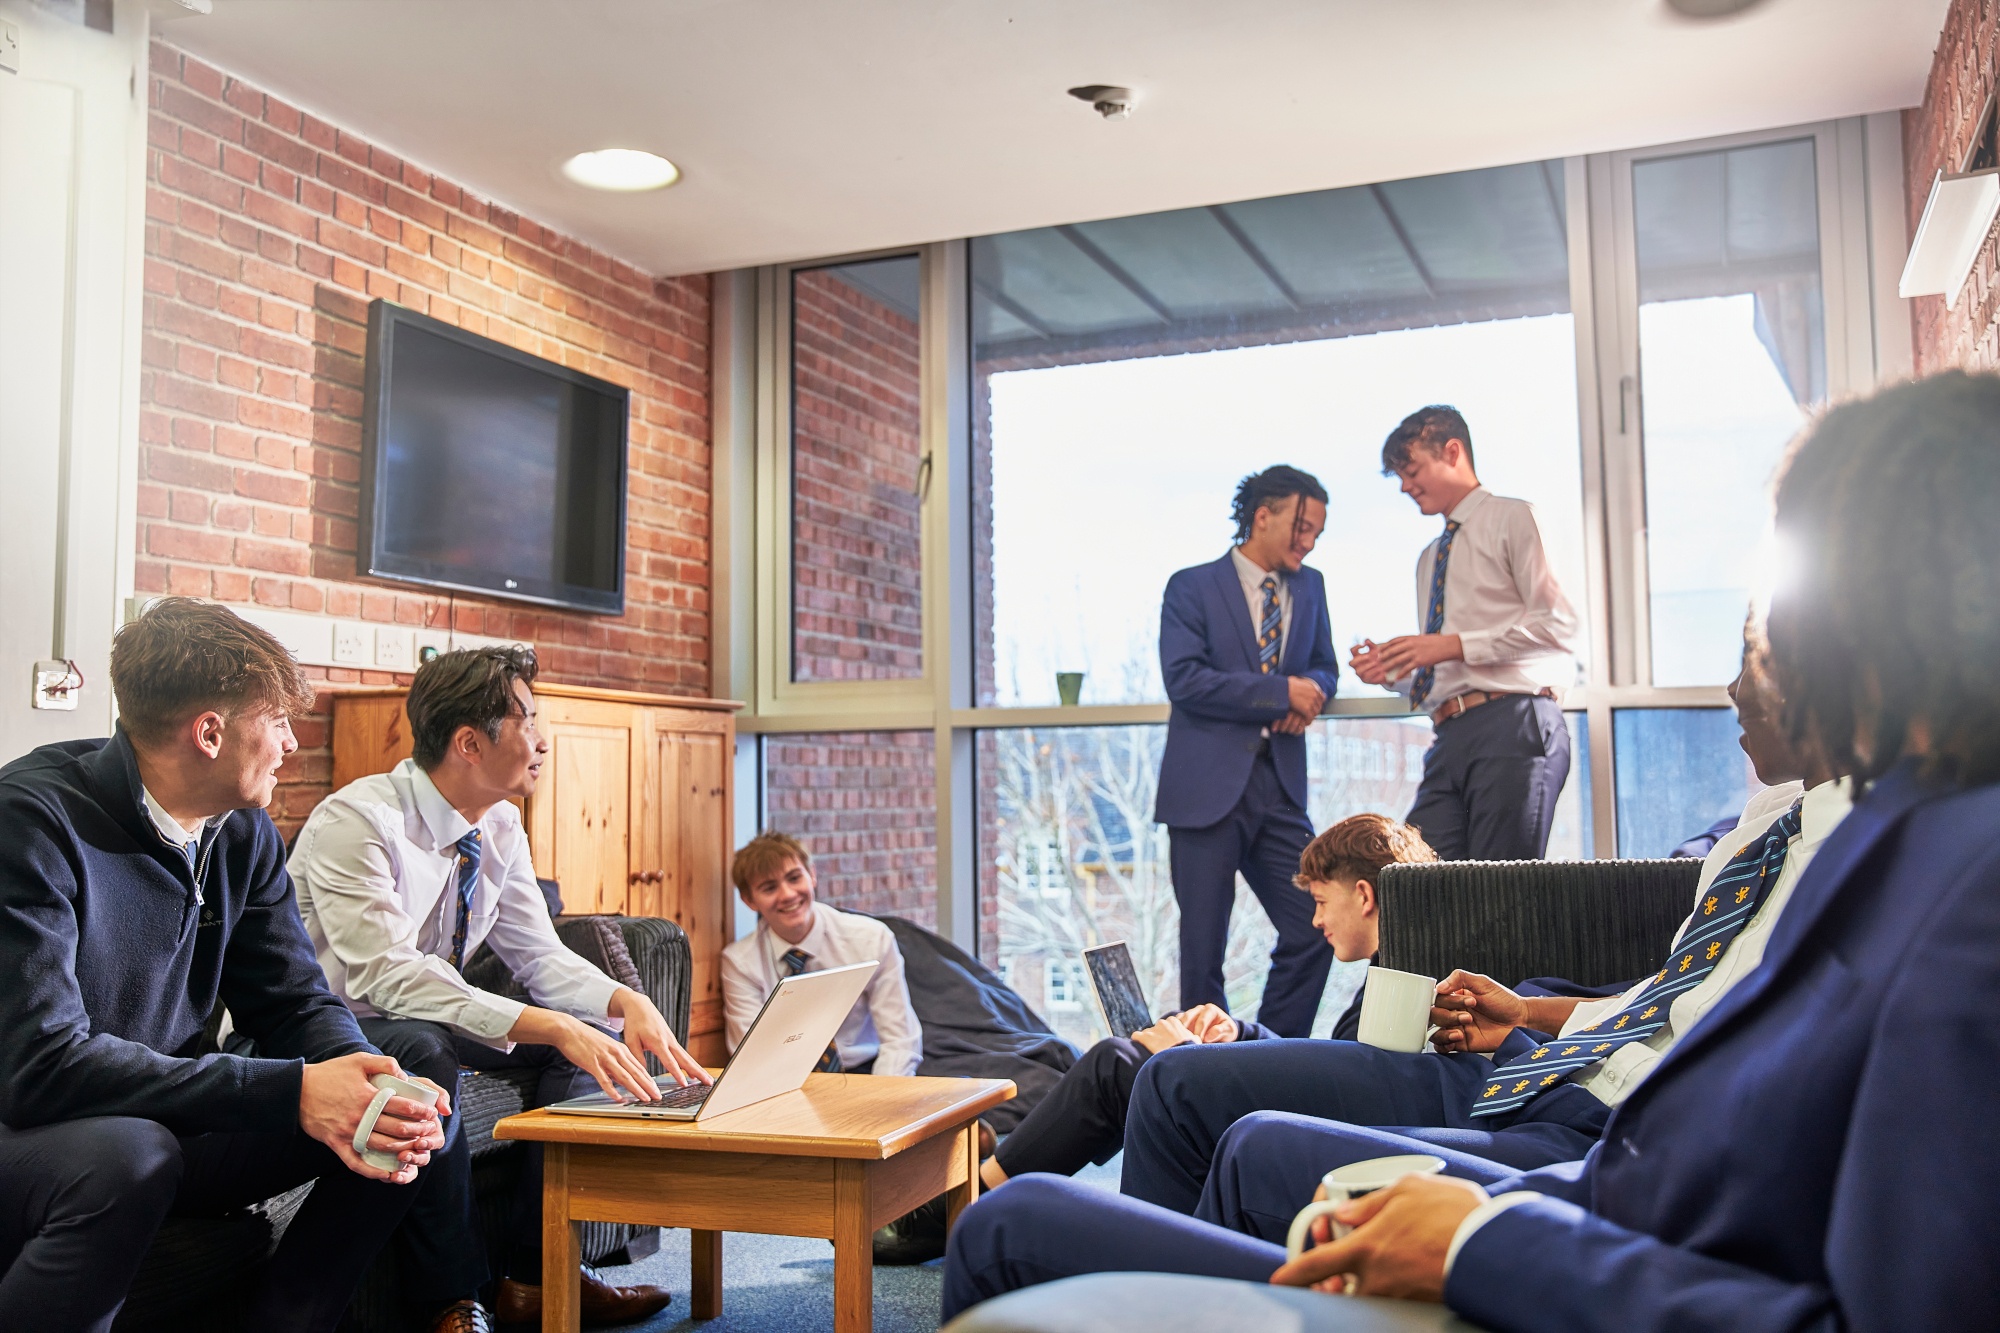 senior sixth form boy boarders sitting on sofas and the floor in common space in the boarding house, with a couple standing infront of a window overlooking campus